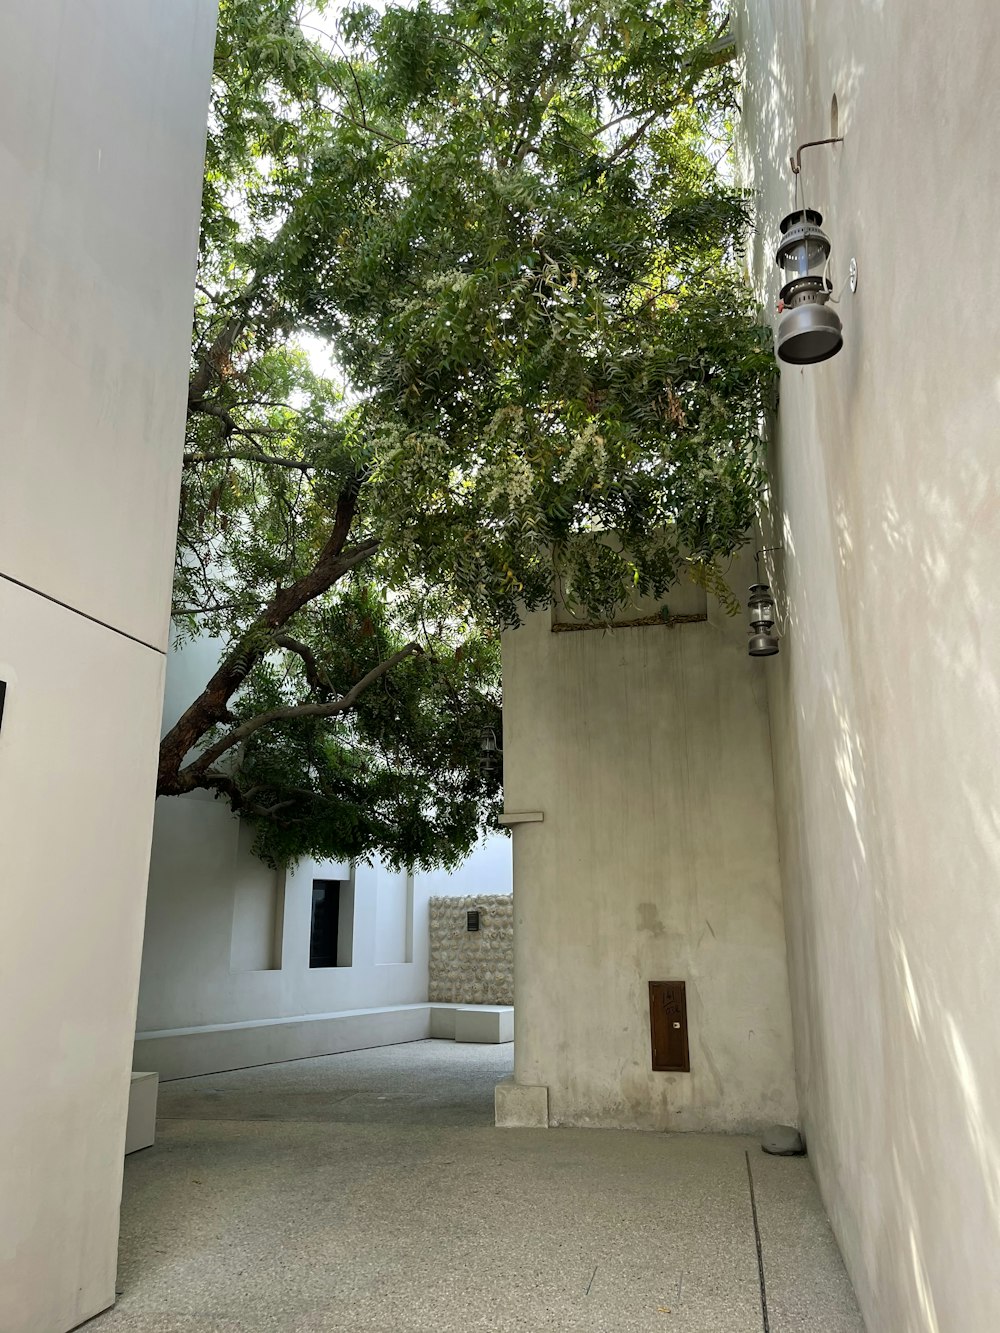 a tree in a courtyard between two buildings